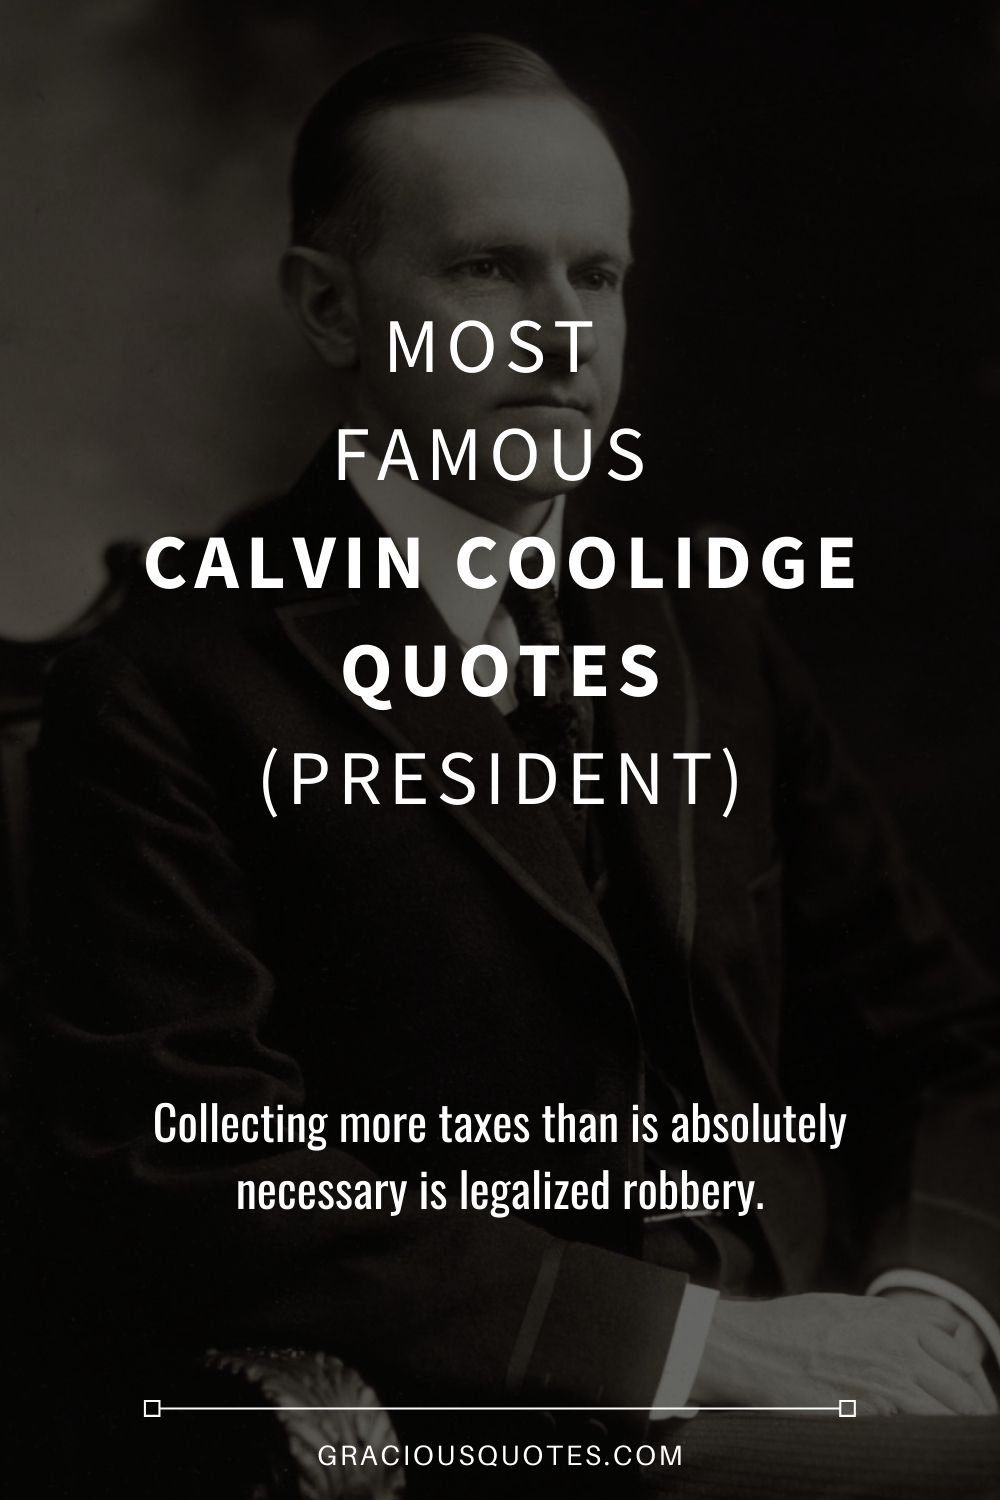 Most Famous Calvin Coolidge Quotes (PRESIDENT) - Gracious Quotes